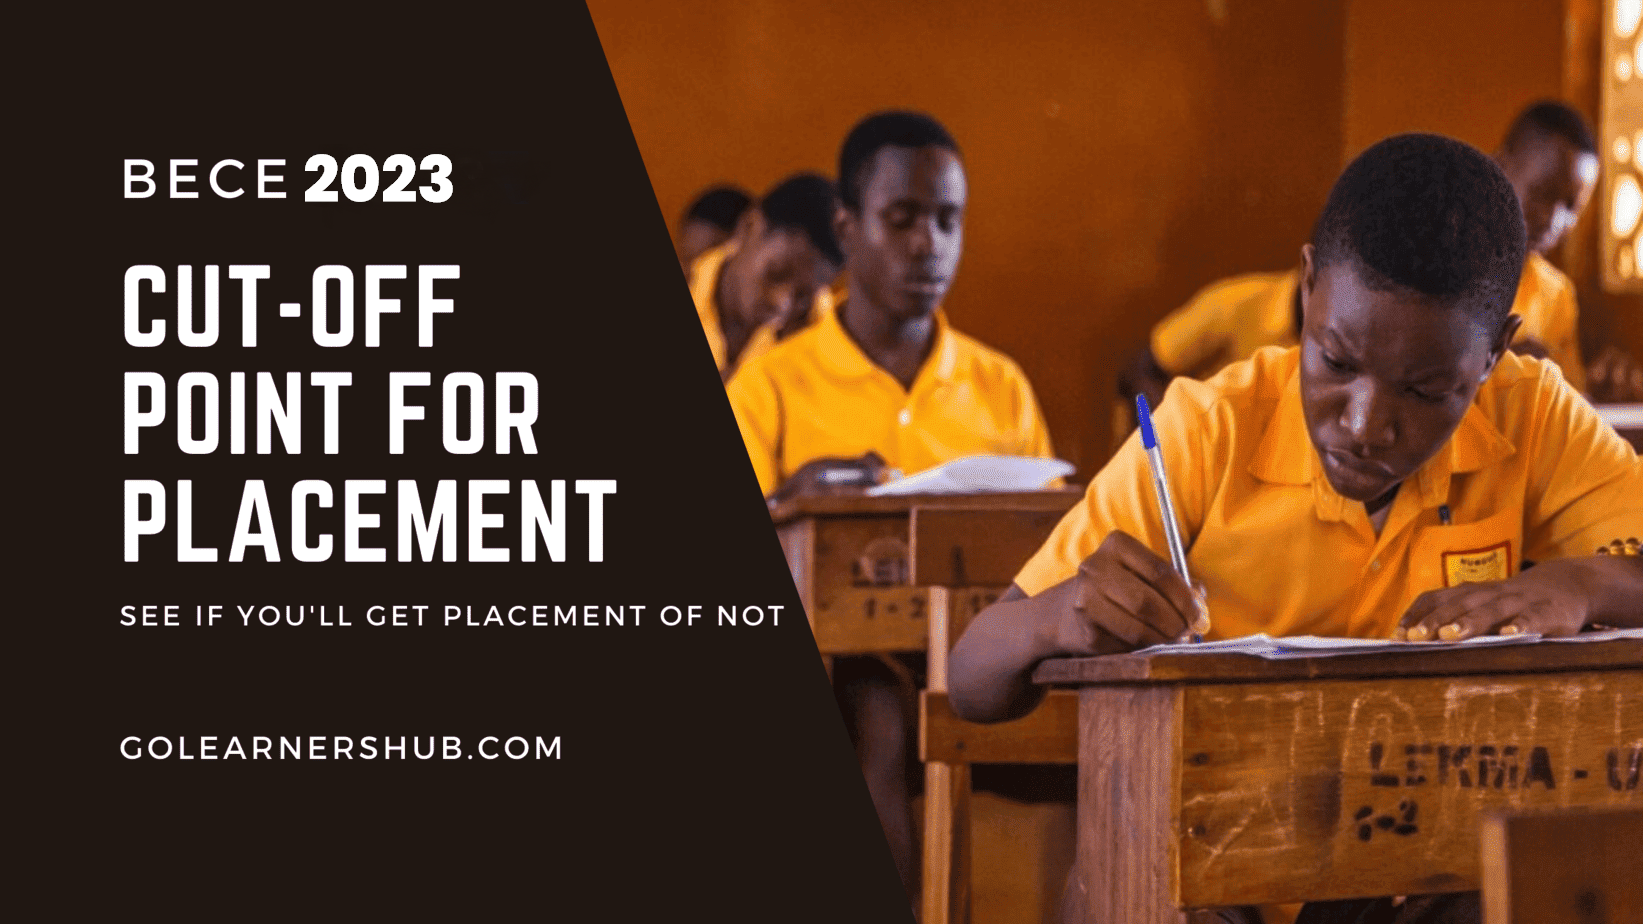 Cut-off Point For Placement of BECE 2023 Graduates, Release Date, & More